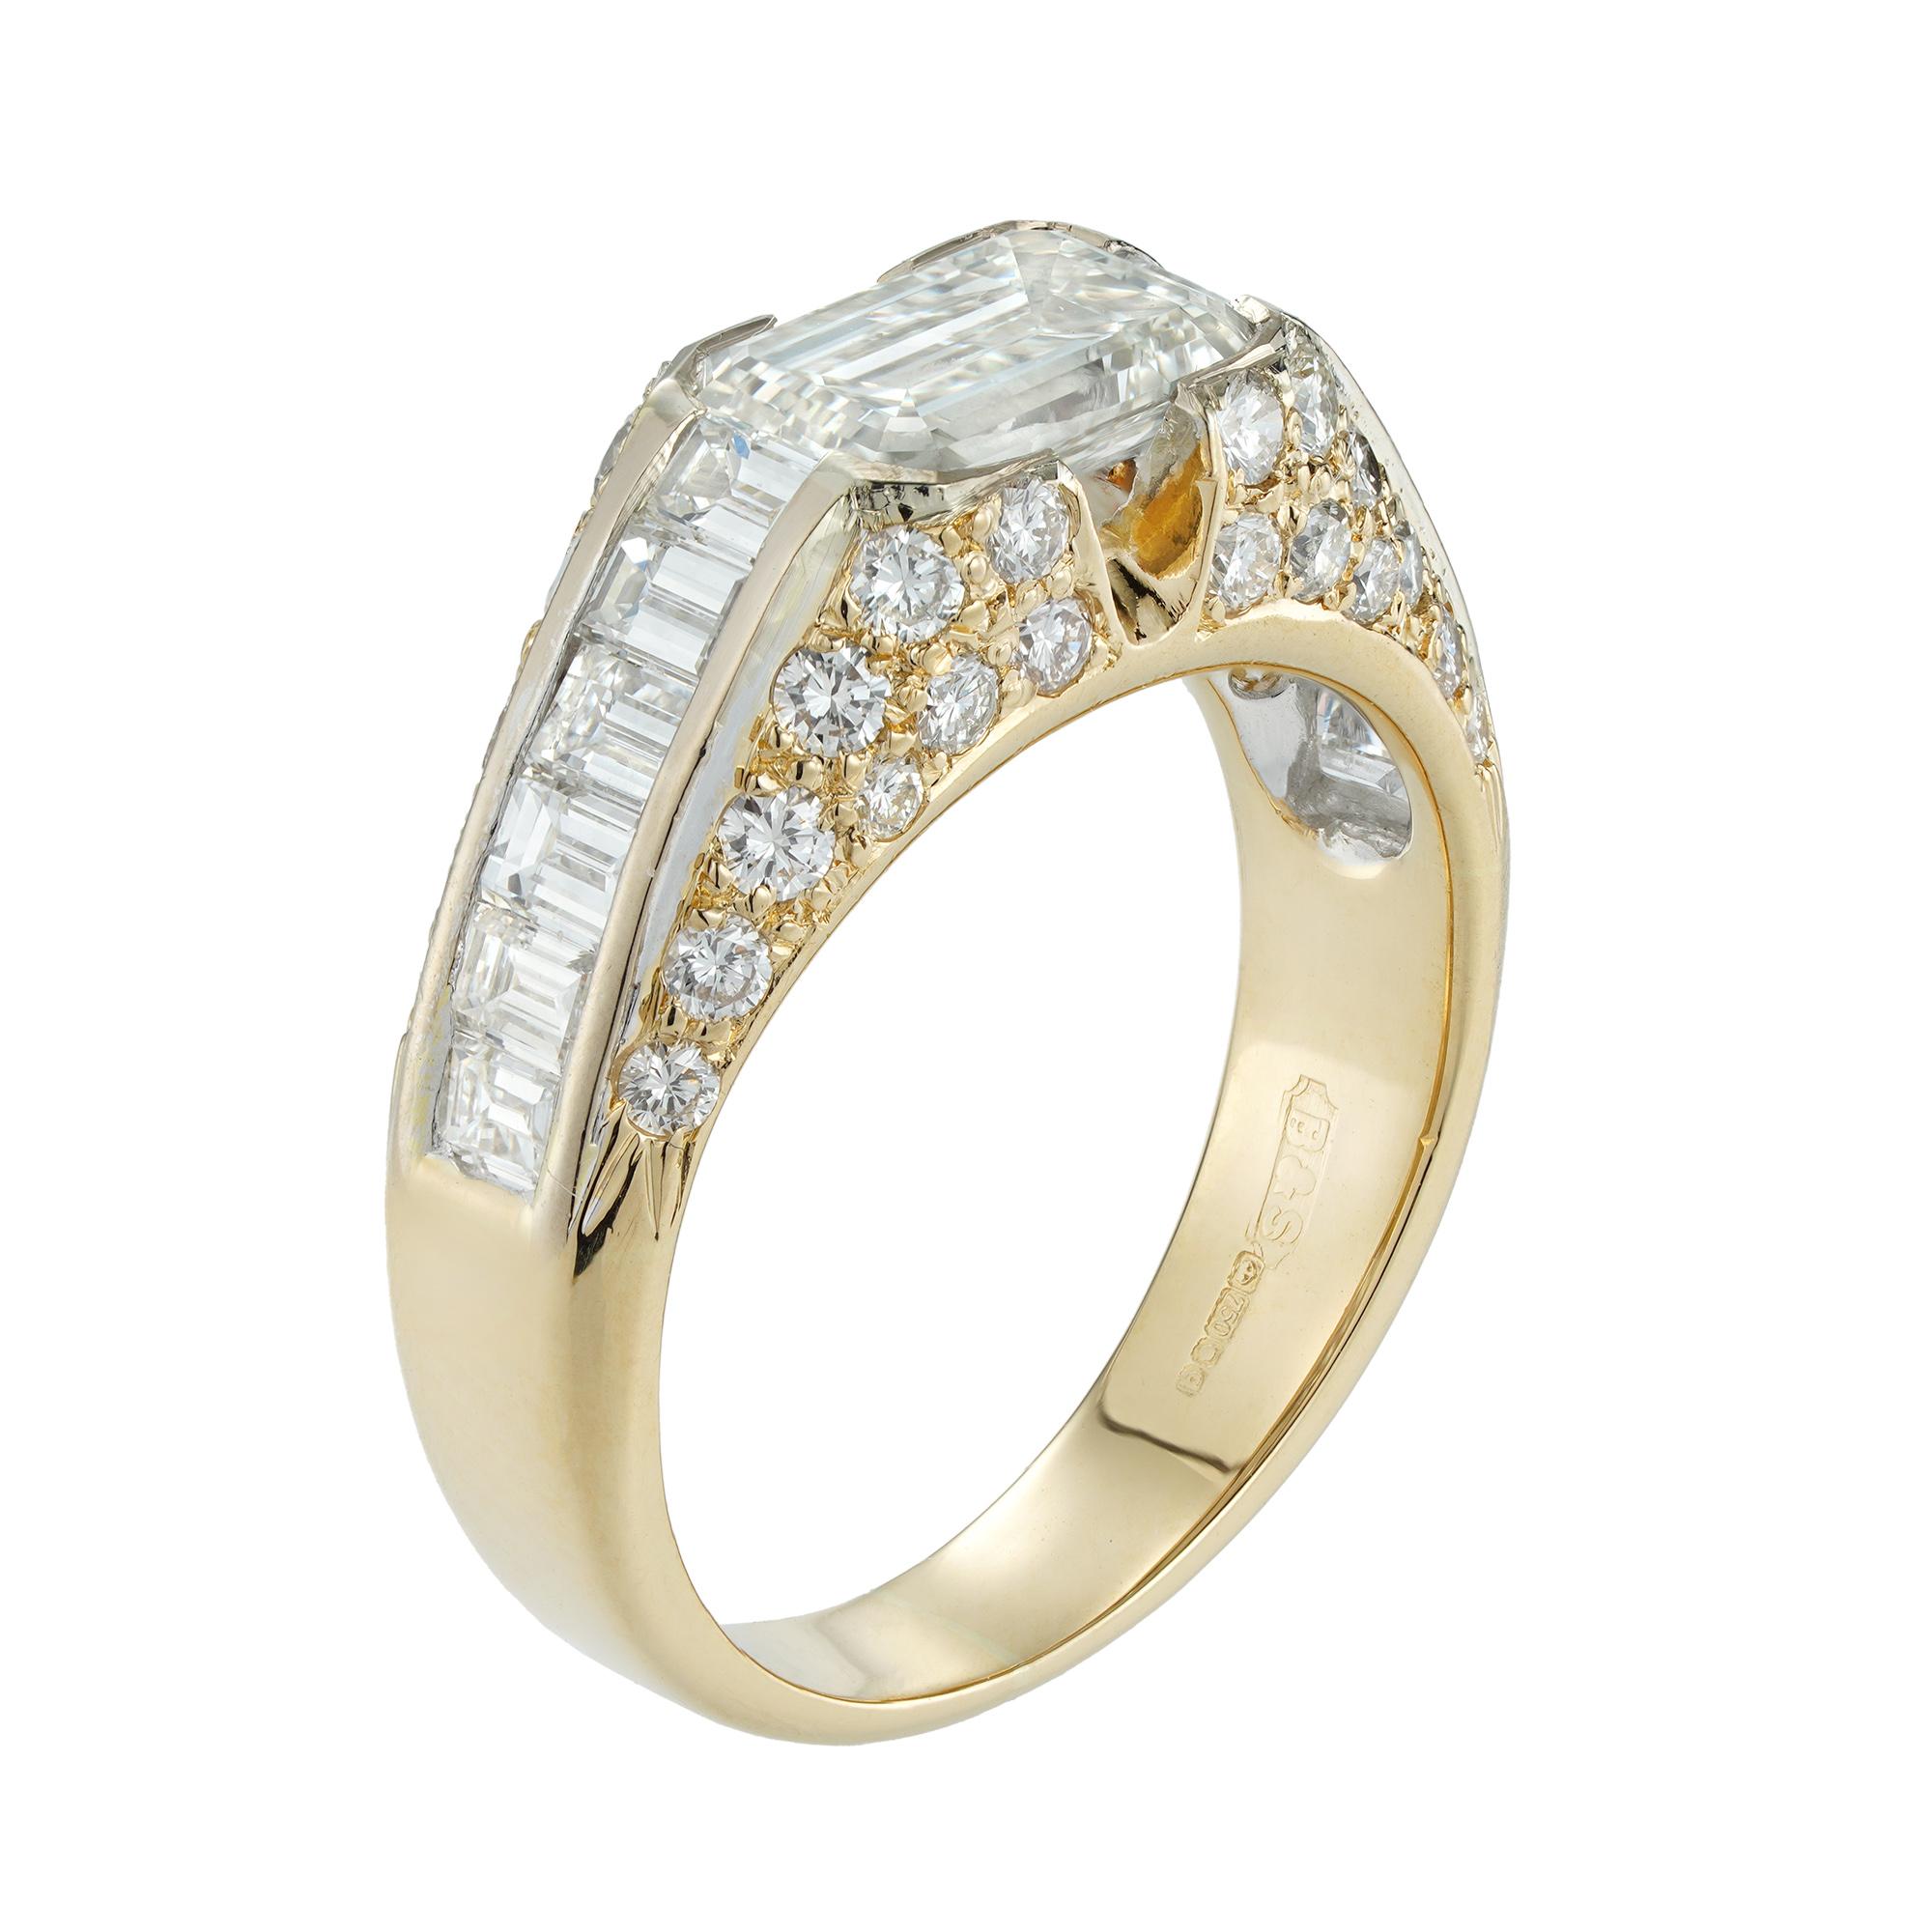 An emerald-cut diamond ring, the emerald-cut diamond weighing 1.16 carats of L colour and VVS2 clarity, accompanied by De Beers Grading Report, set with six baguette-cut diamonds on each shoulder and pave-set sides, all diamonds weighing an